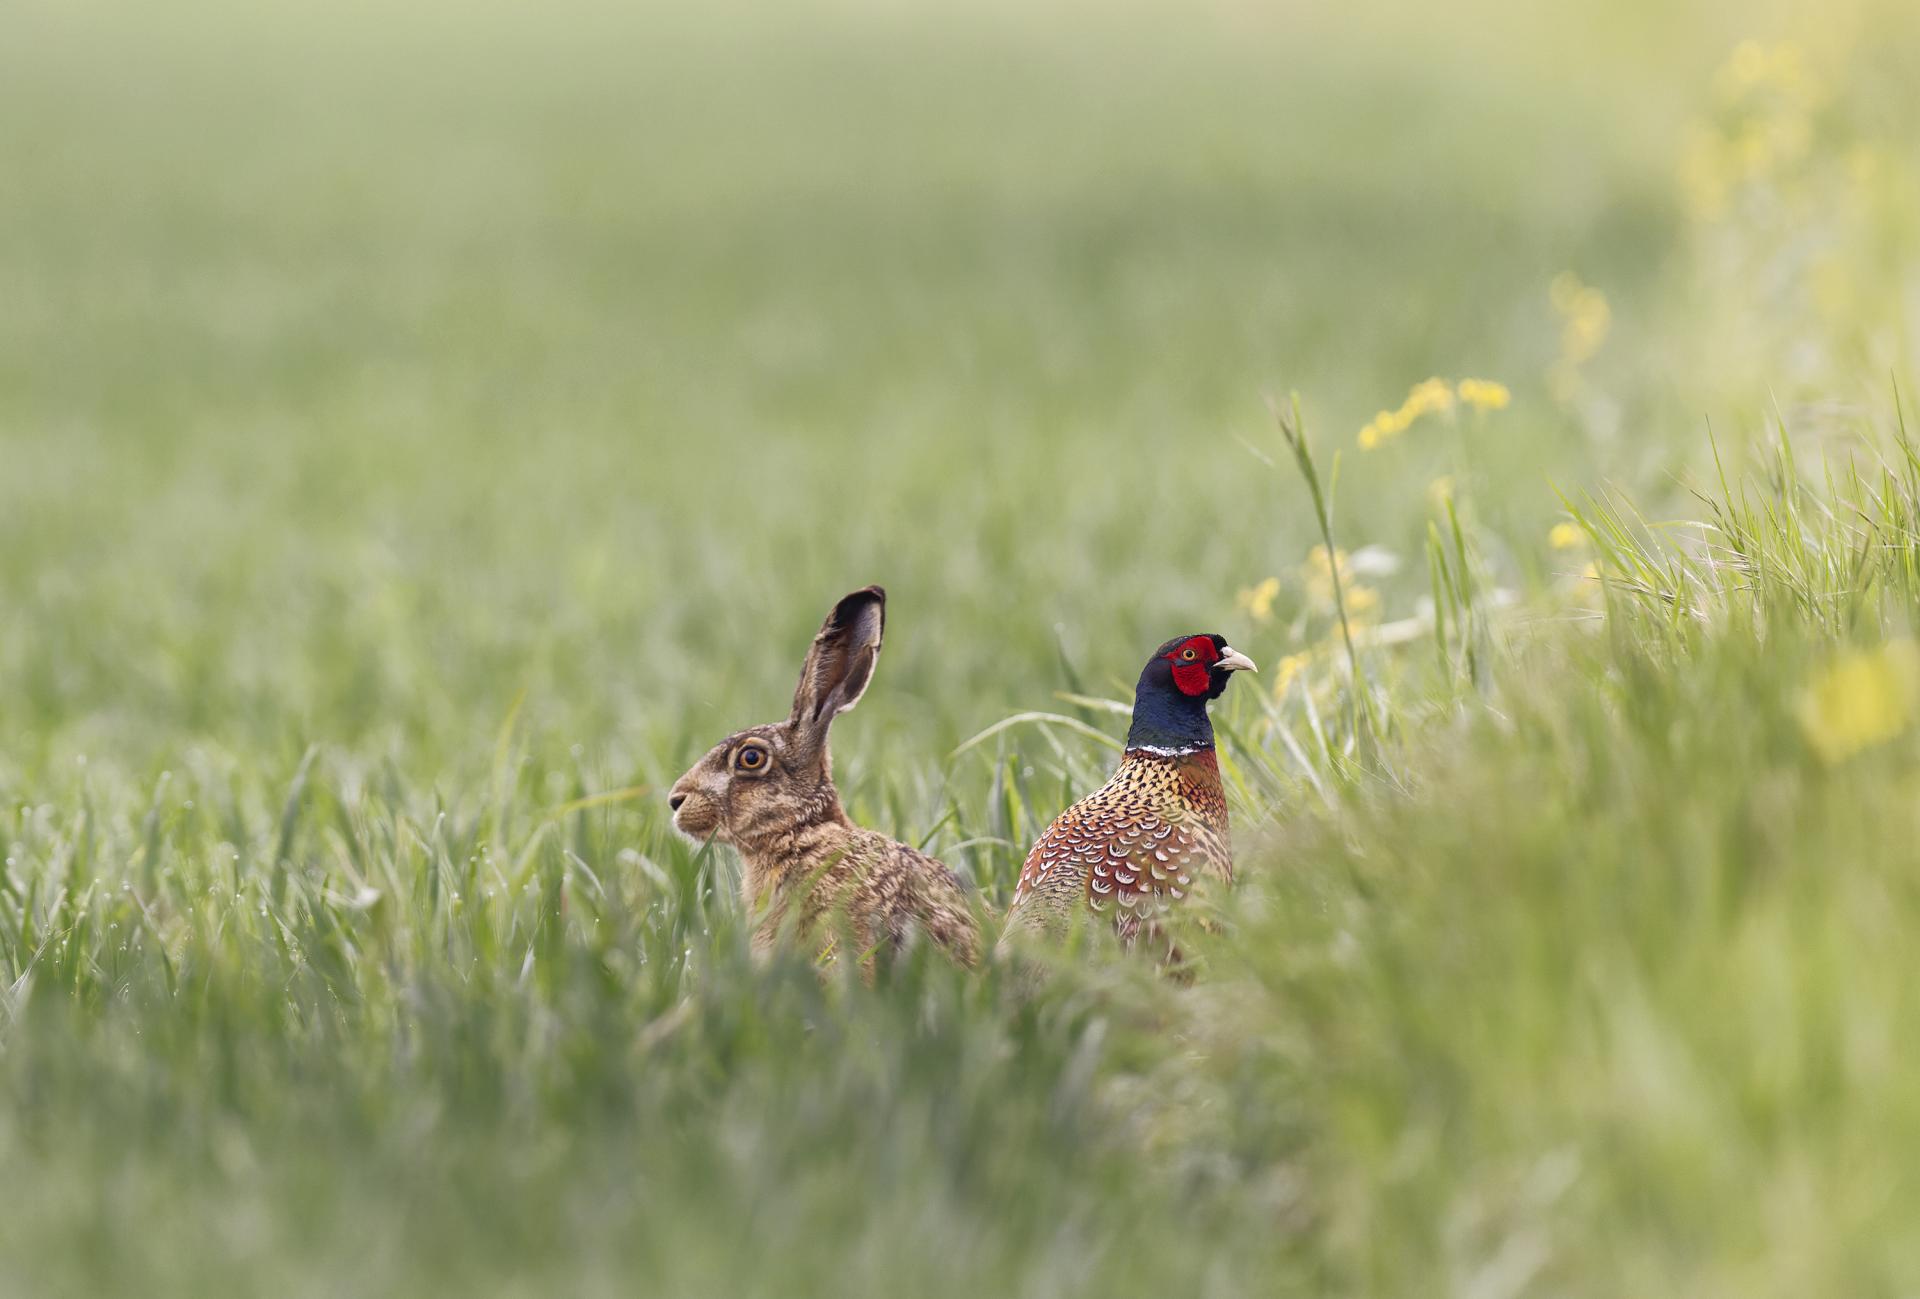 European Photography Awards Winner - The rabbit and the pheasant